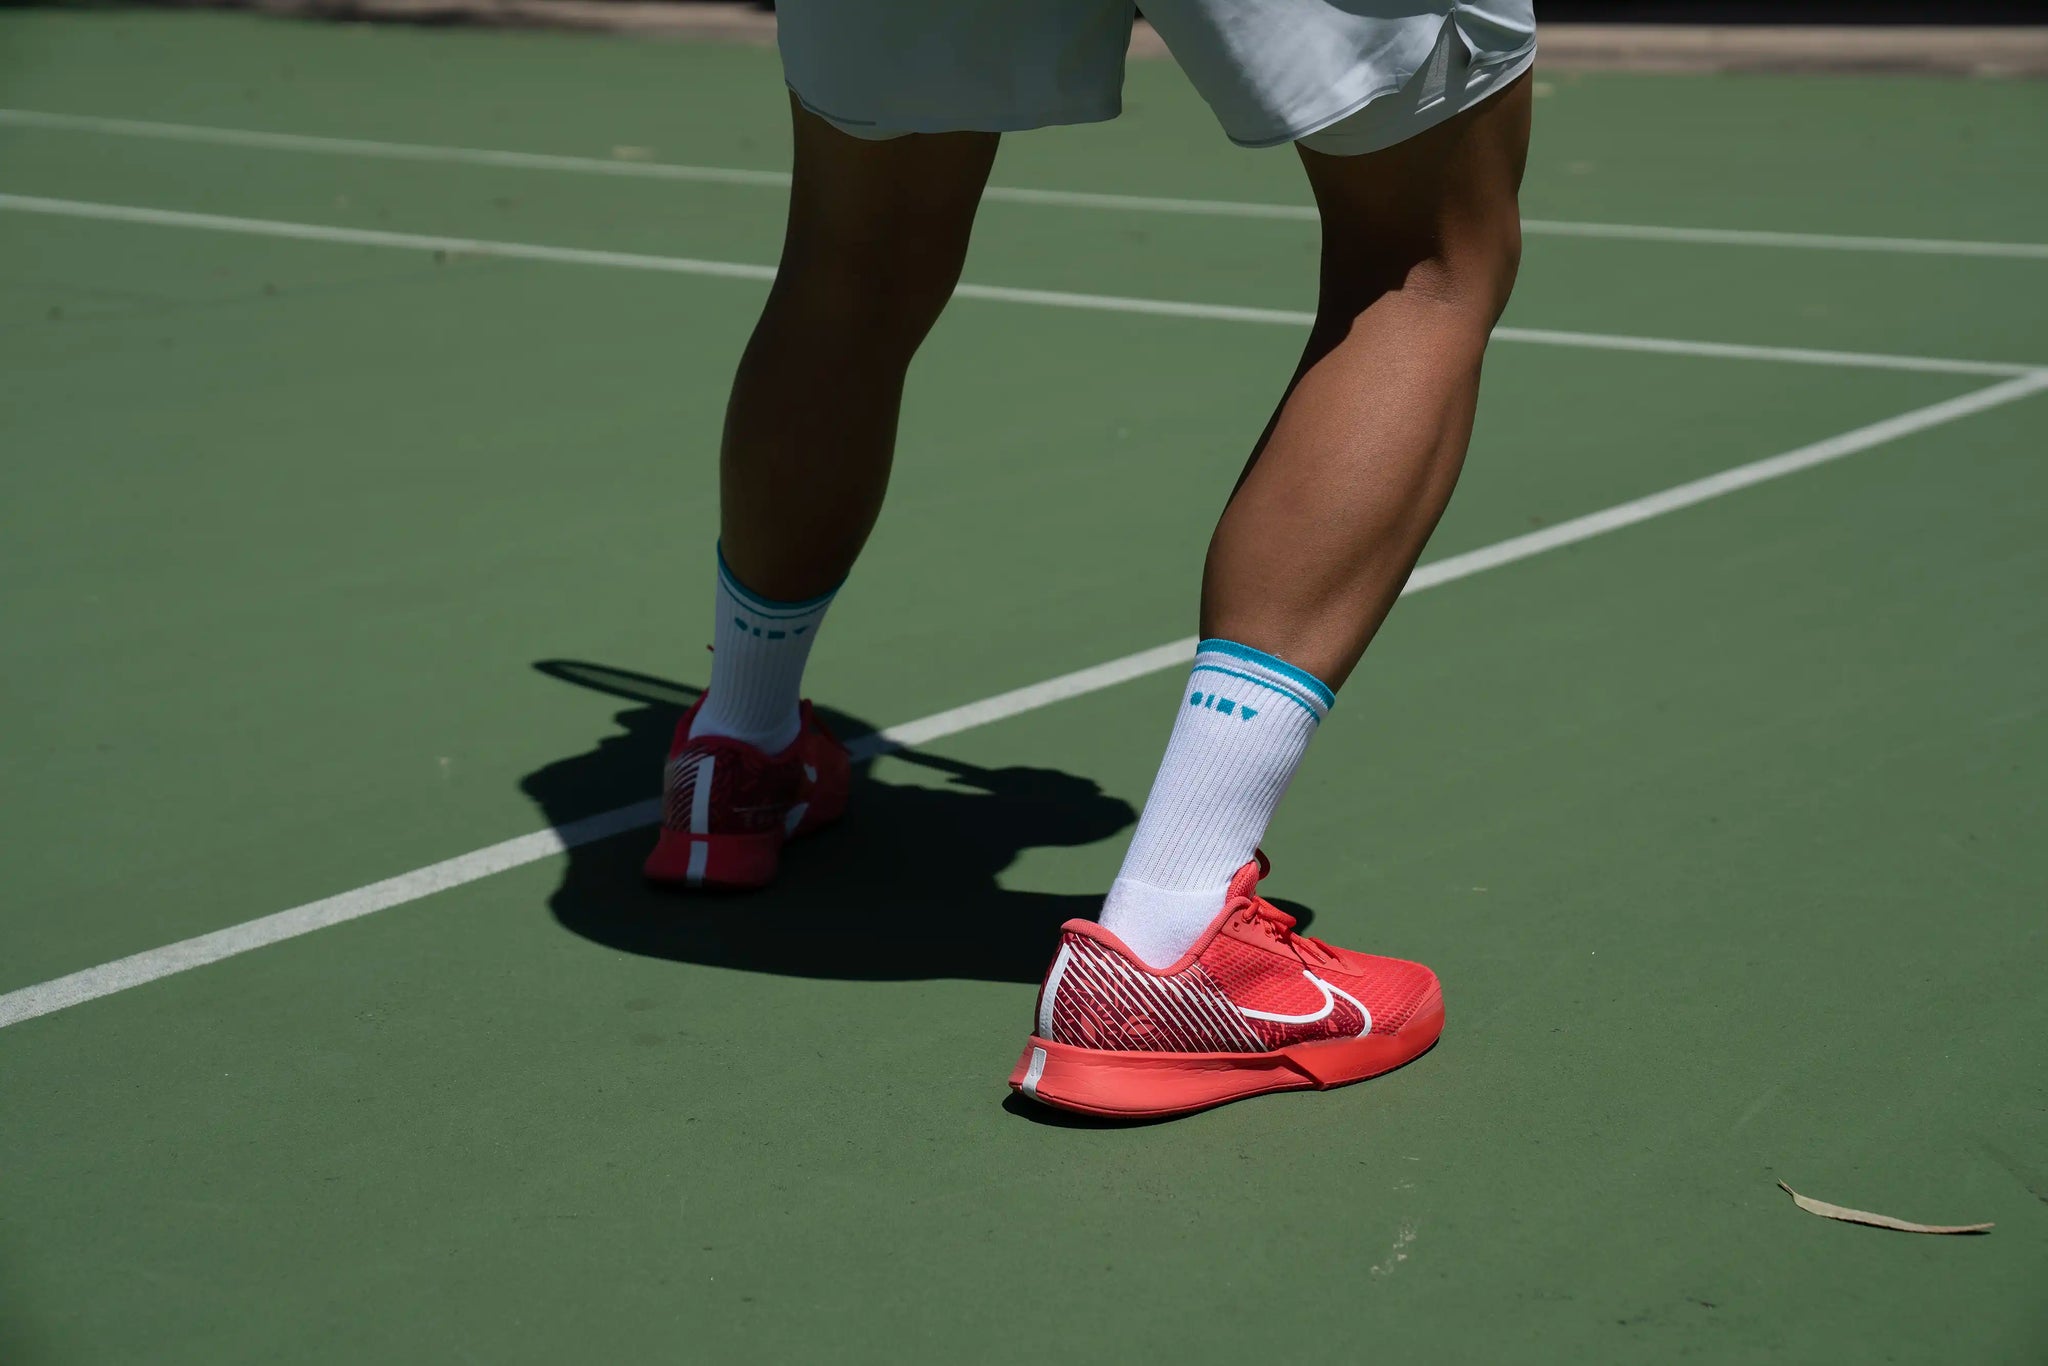 What socks do tennis players use?